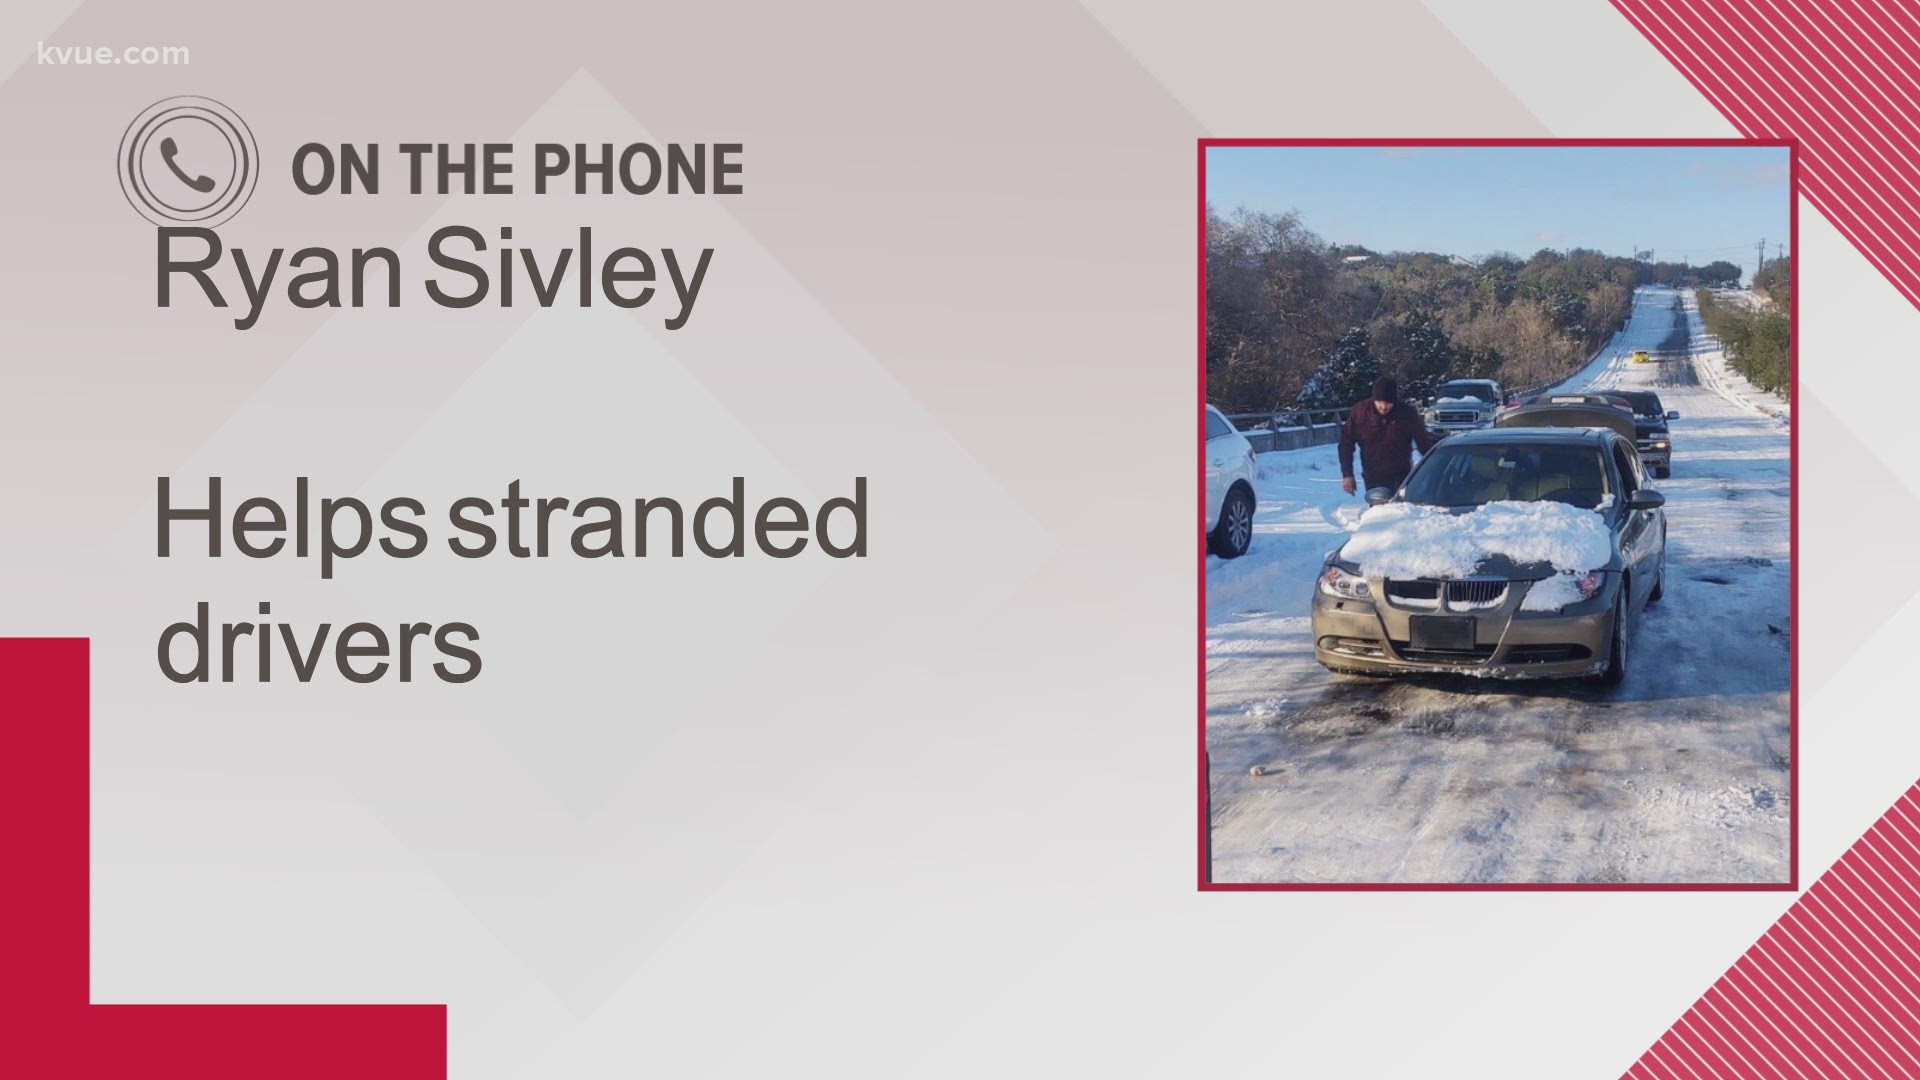 Ryan Sivley has been helping Texans who are stranded on roadways.